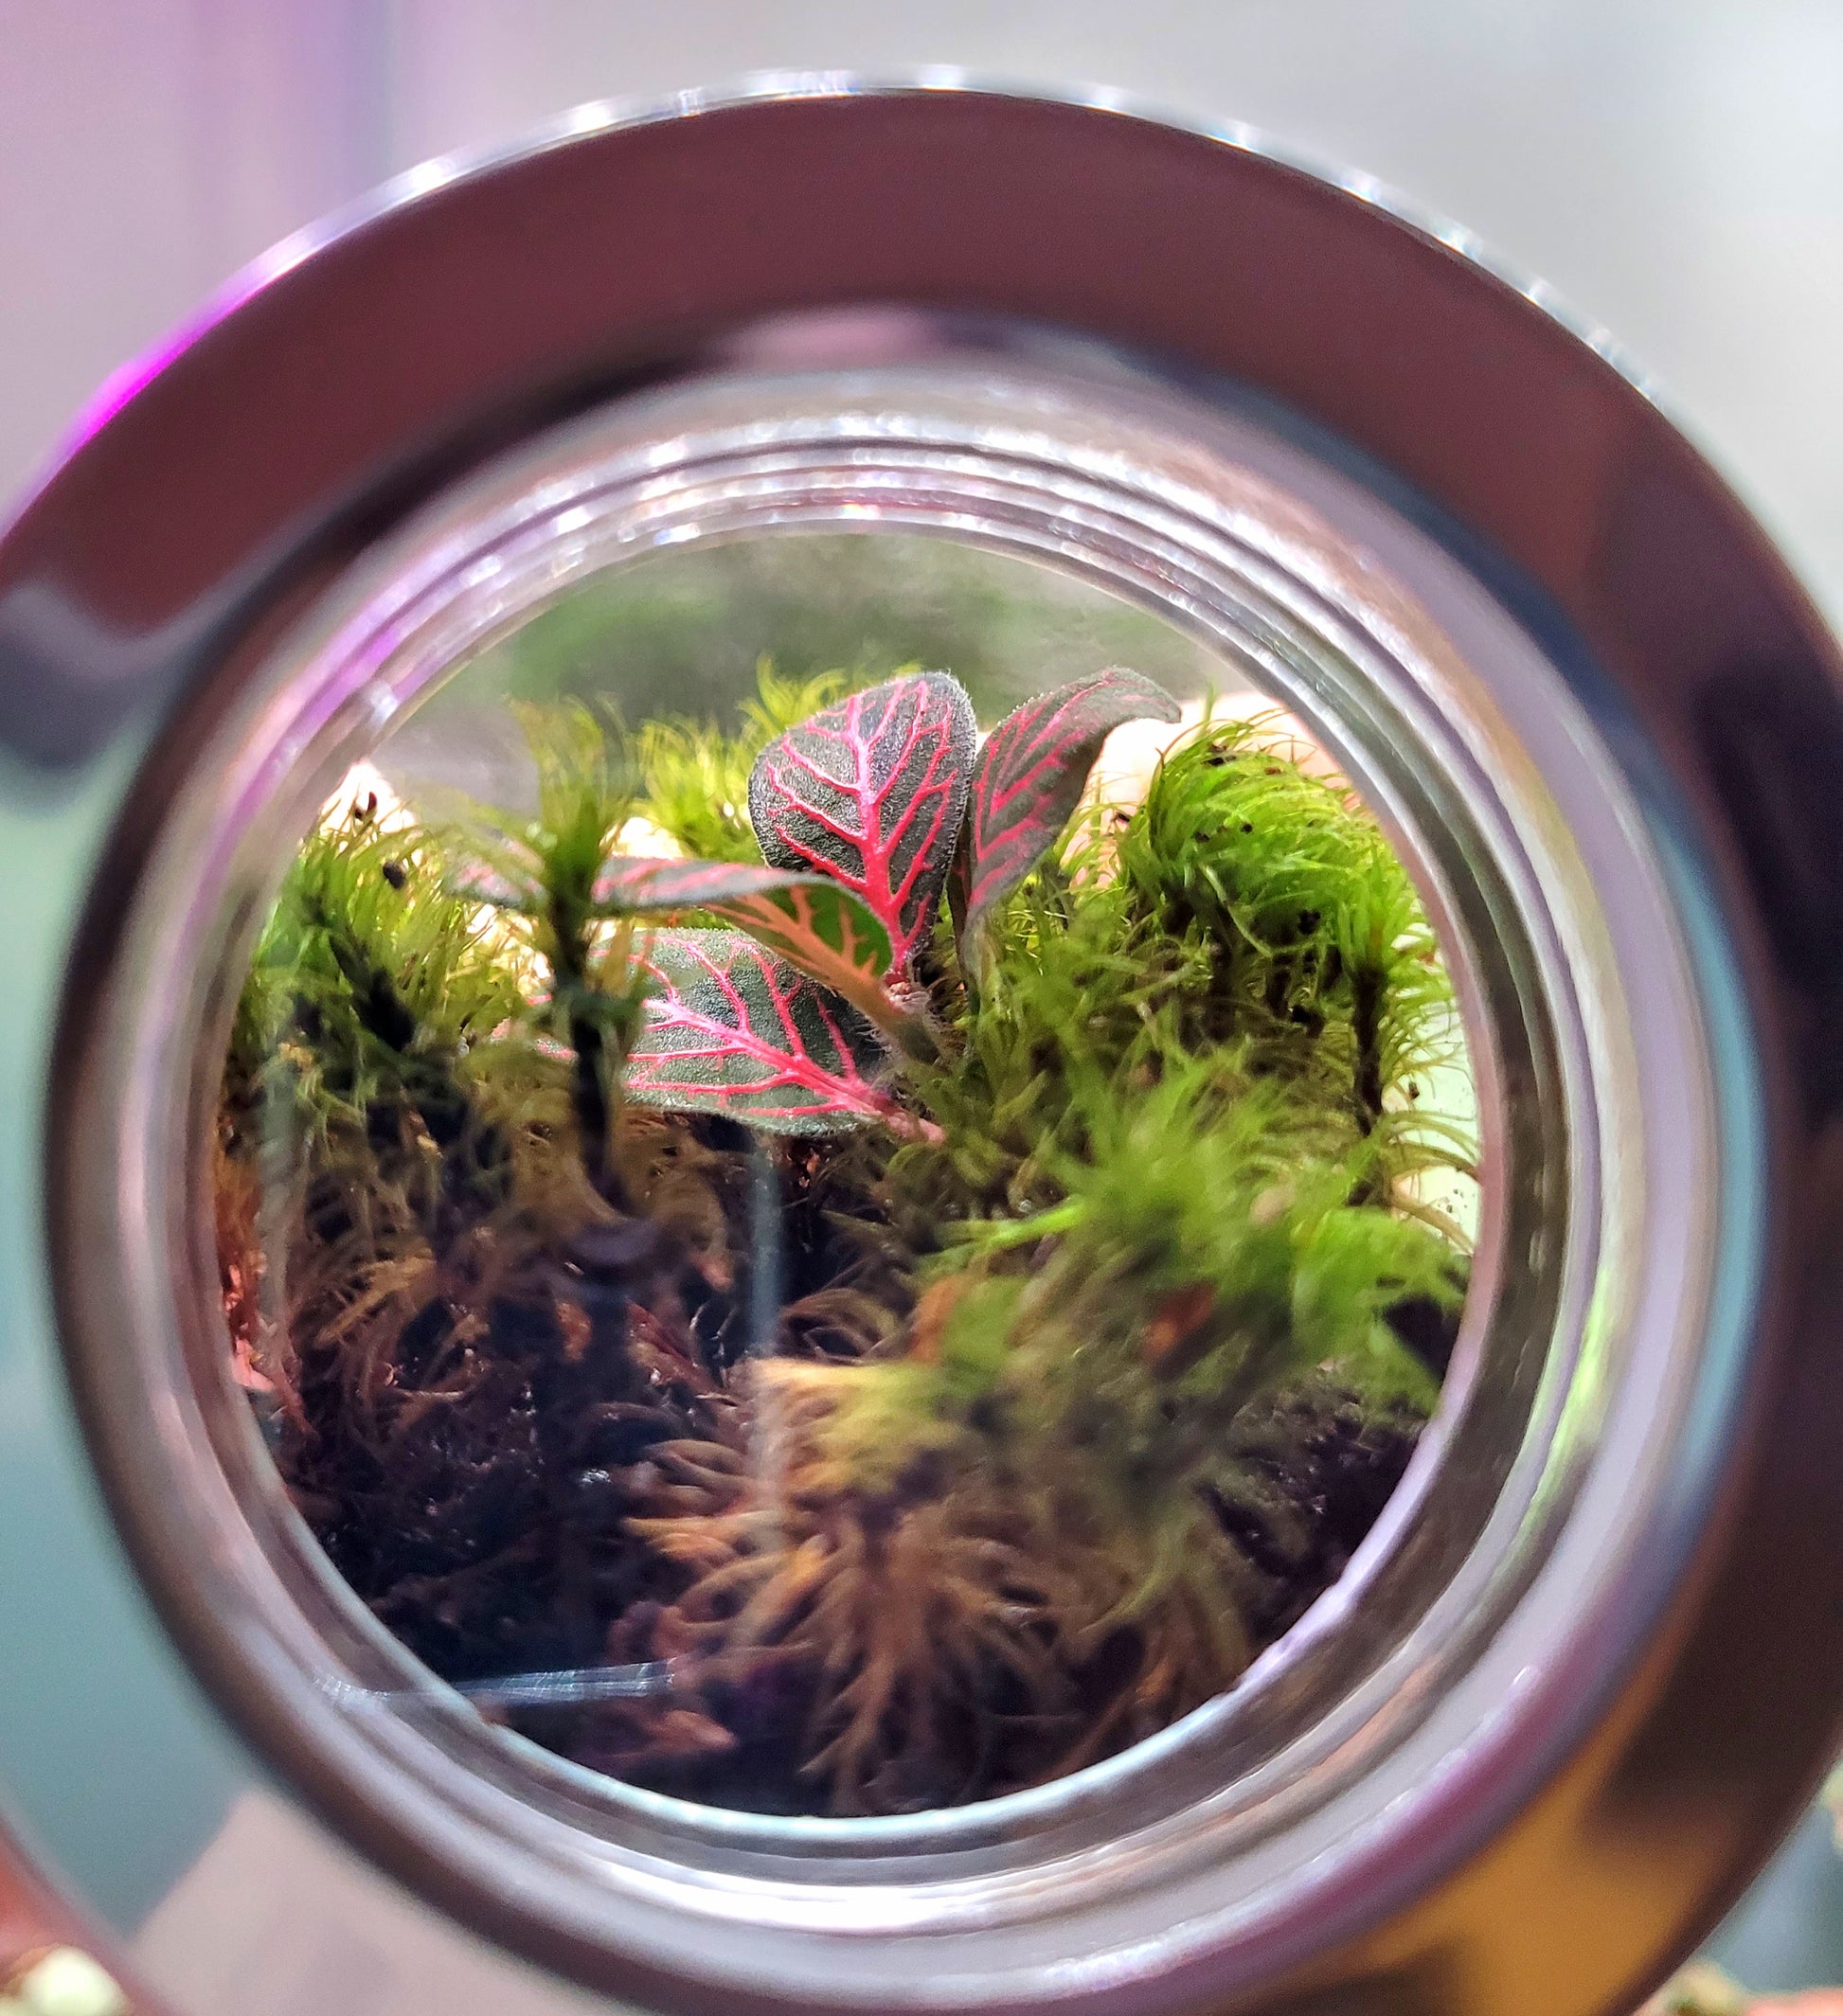 The view through the window of a small forest floor terrarium with moss and a red nerve plant.